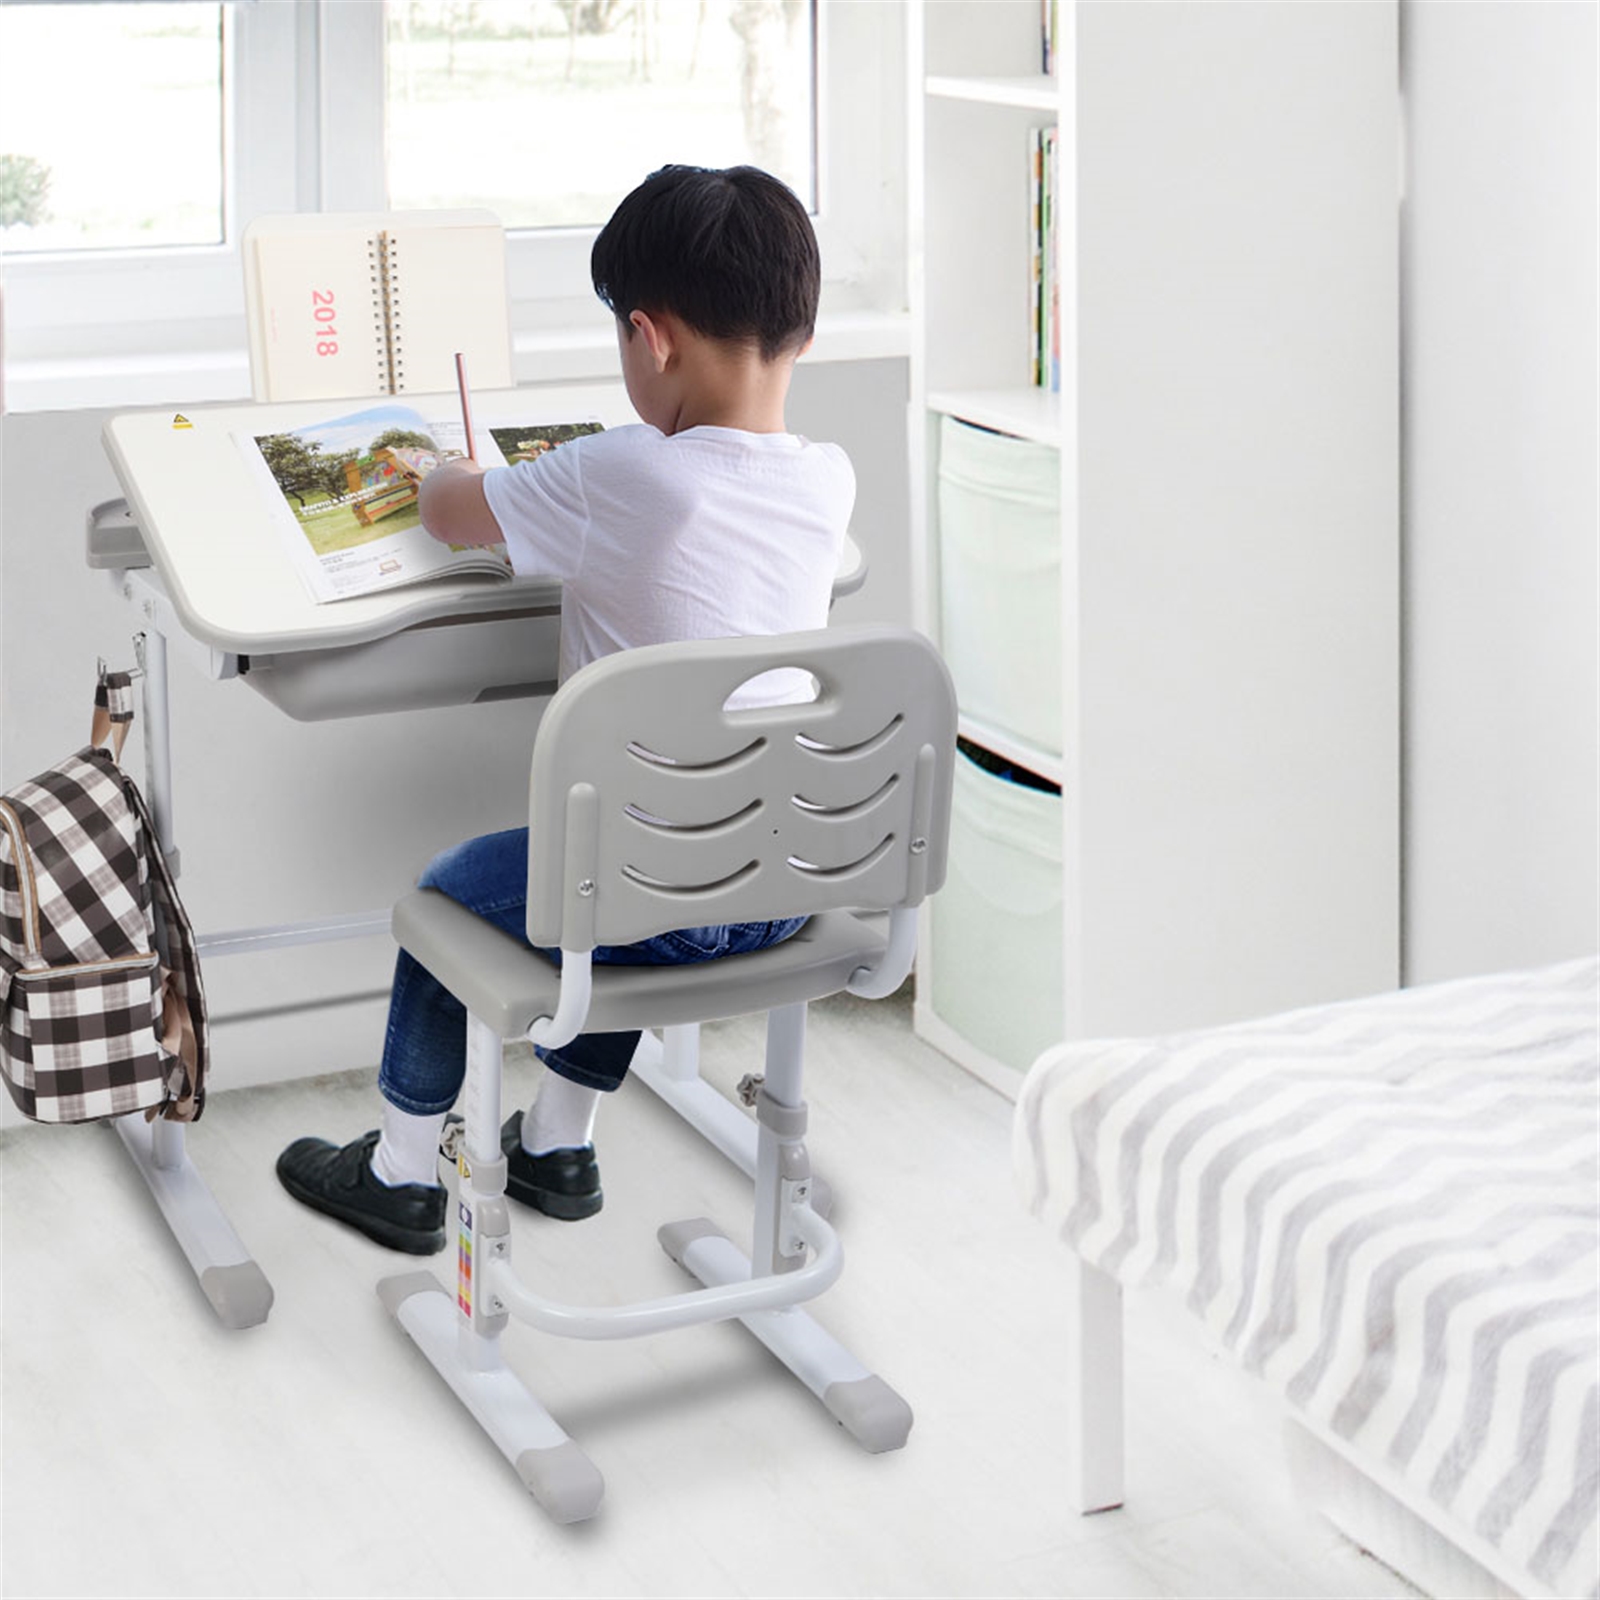 70CM Lifting Table Can Tilt Children Learning Table And Chair Gray (With Reading Stand Without Table